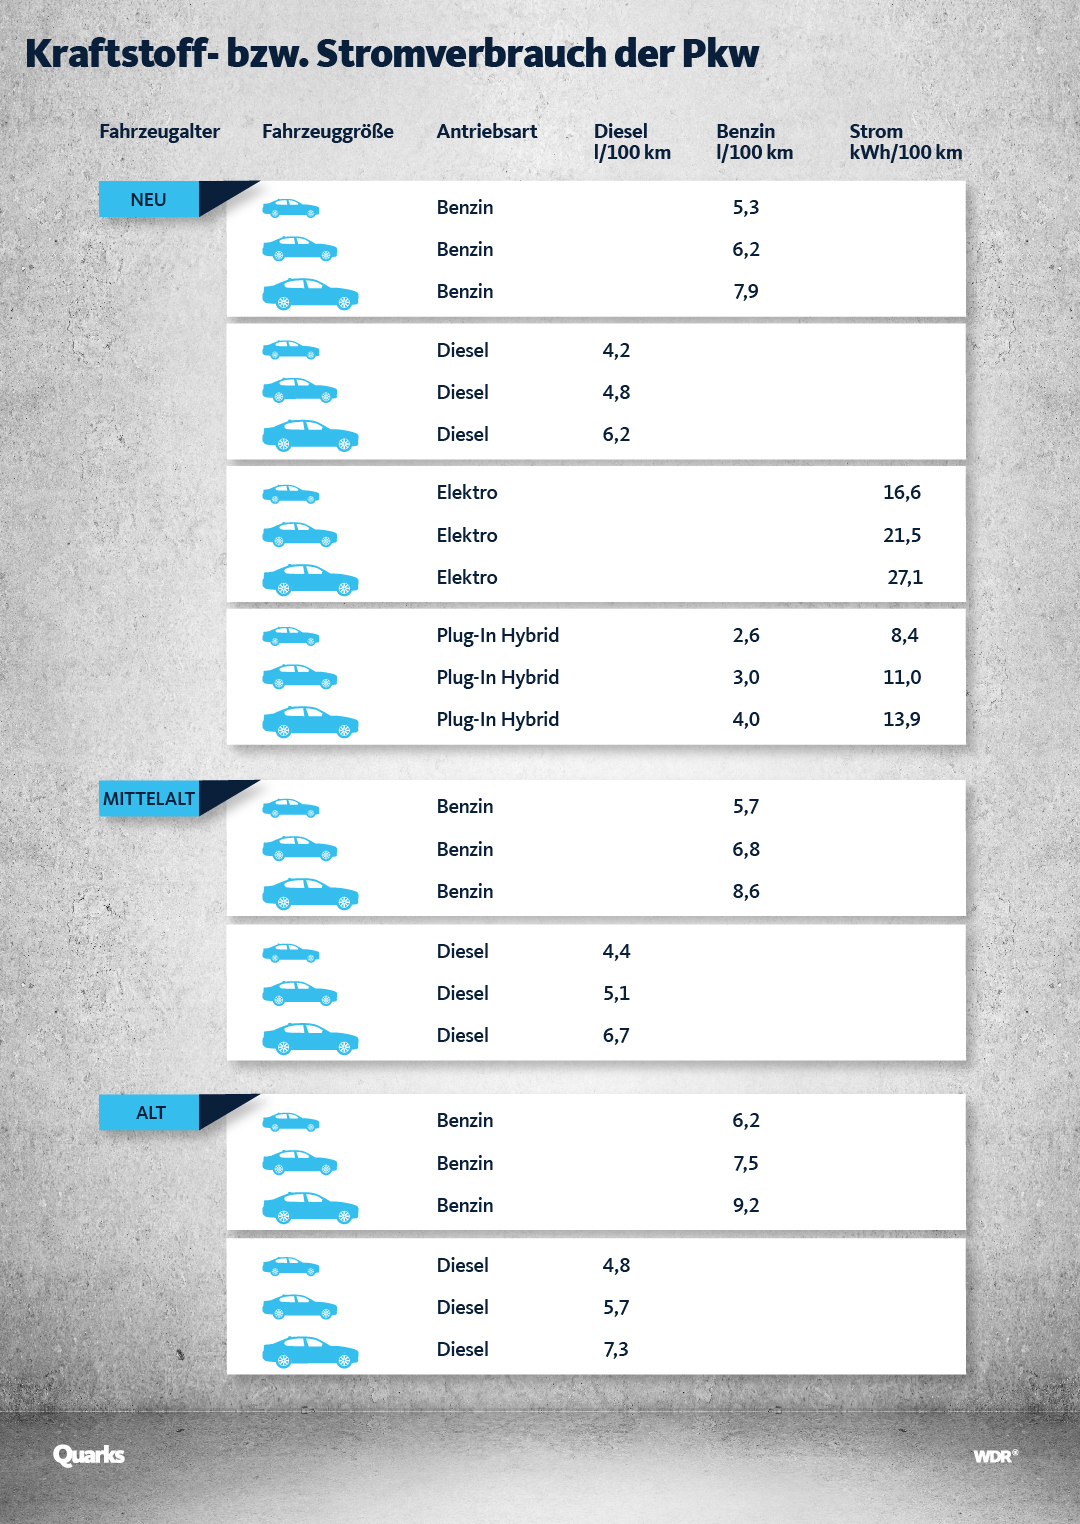 Table with consumption for different car sizes.